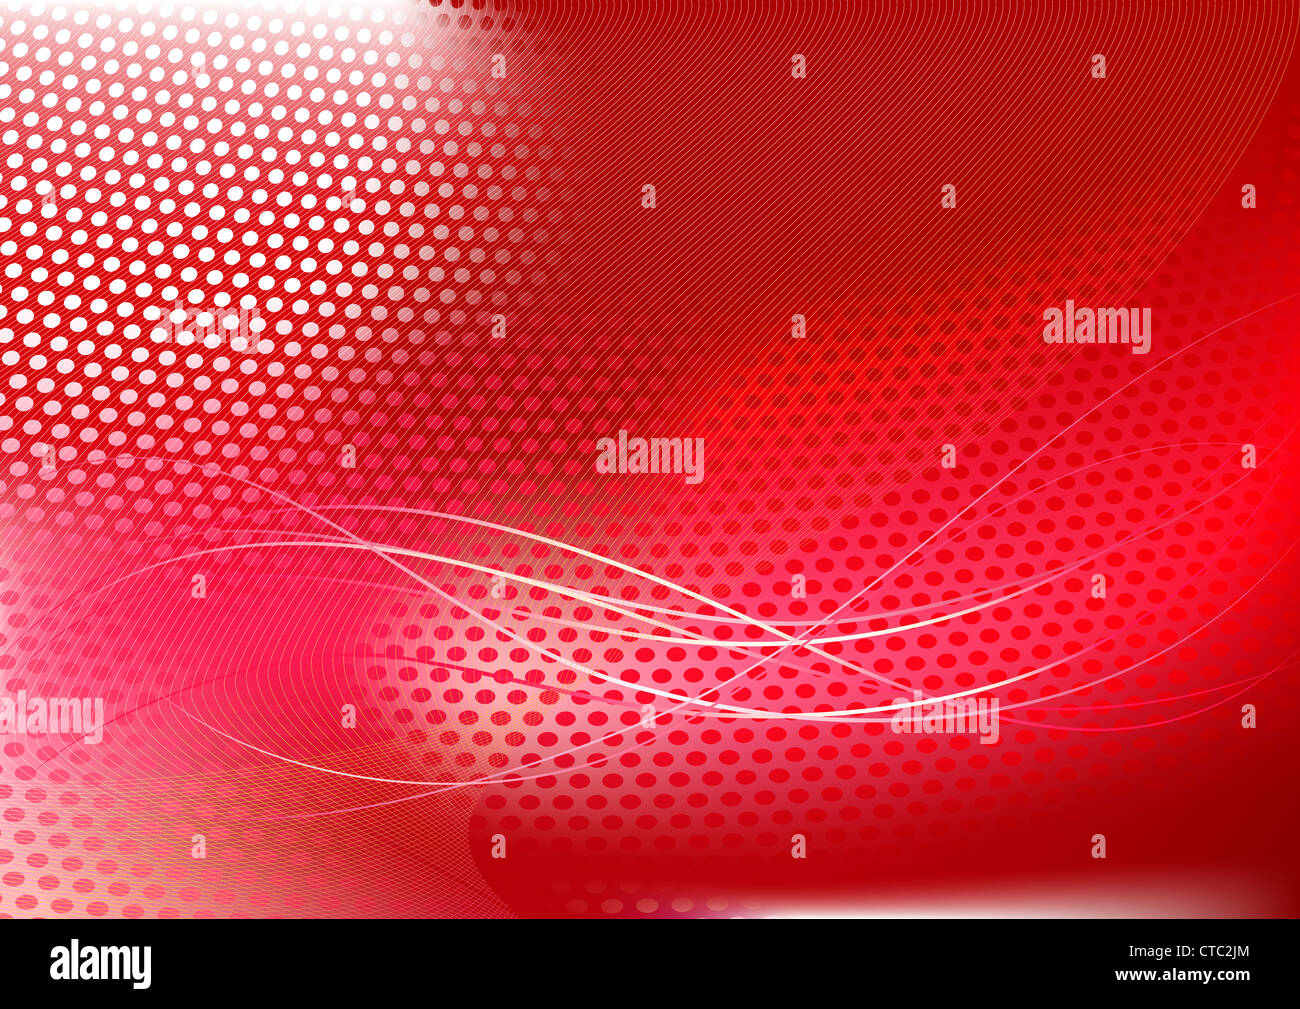 Vector illustration red abstract techno background made dots curved lines Great for backgrounds layering over other images Stock Photo